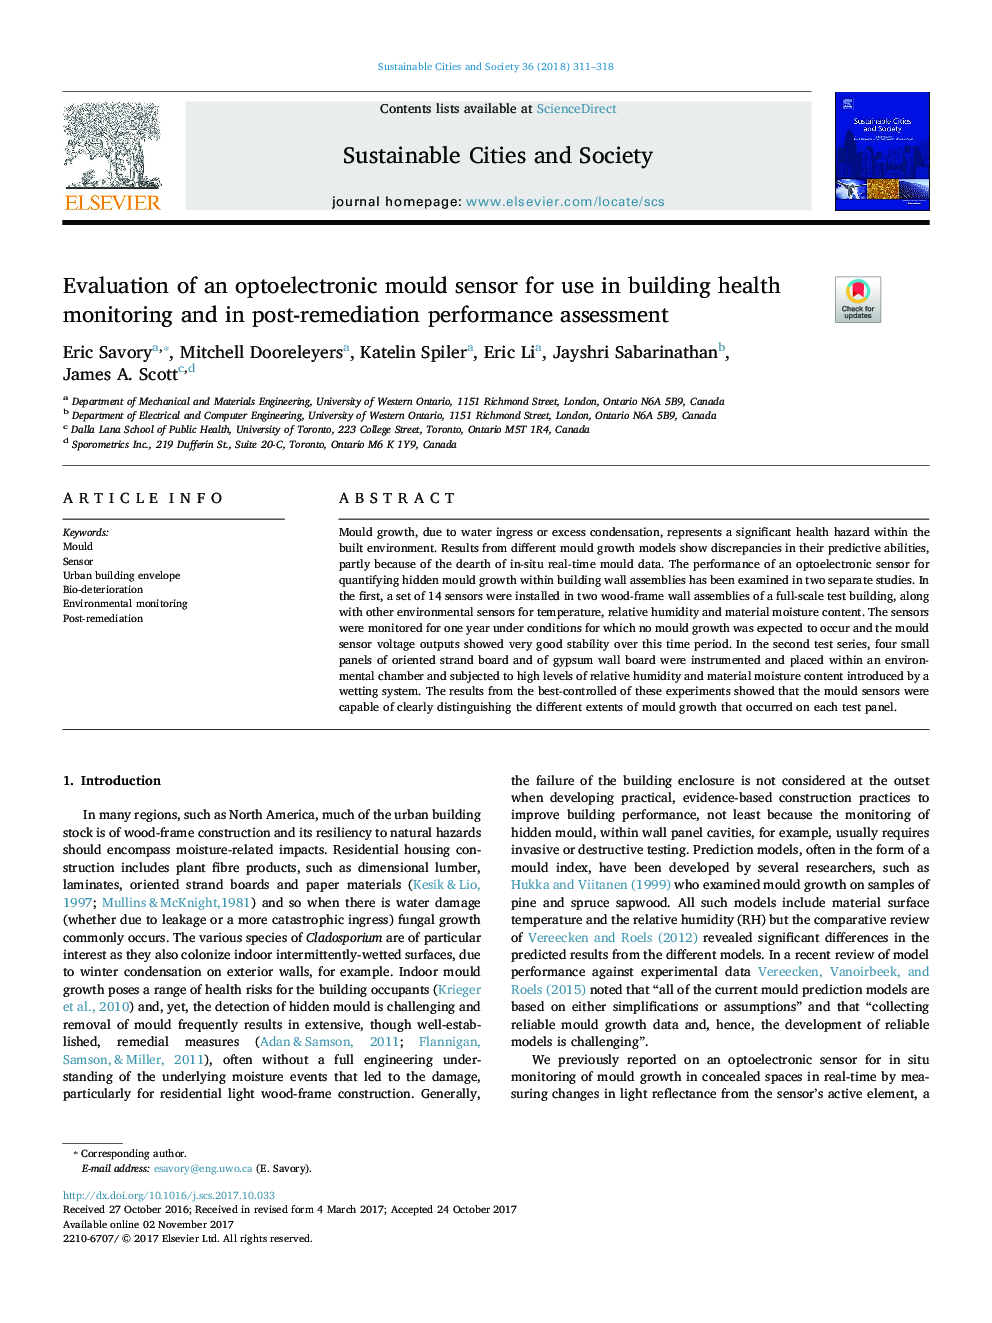 Evaluation of an optoelectronic mould sensor for use in building health monitoring and in post-remediation performance assessment